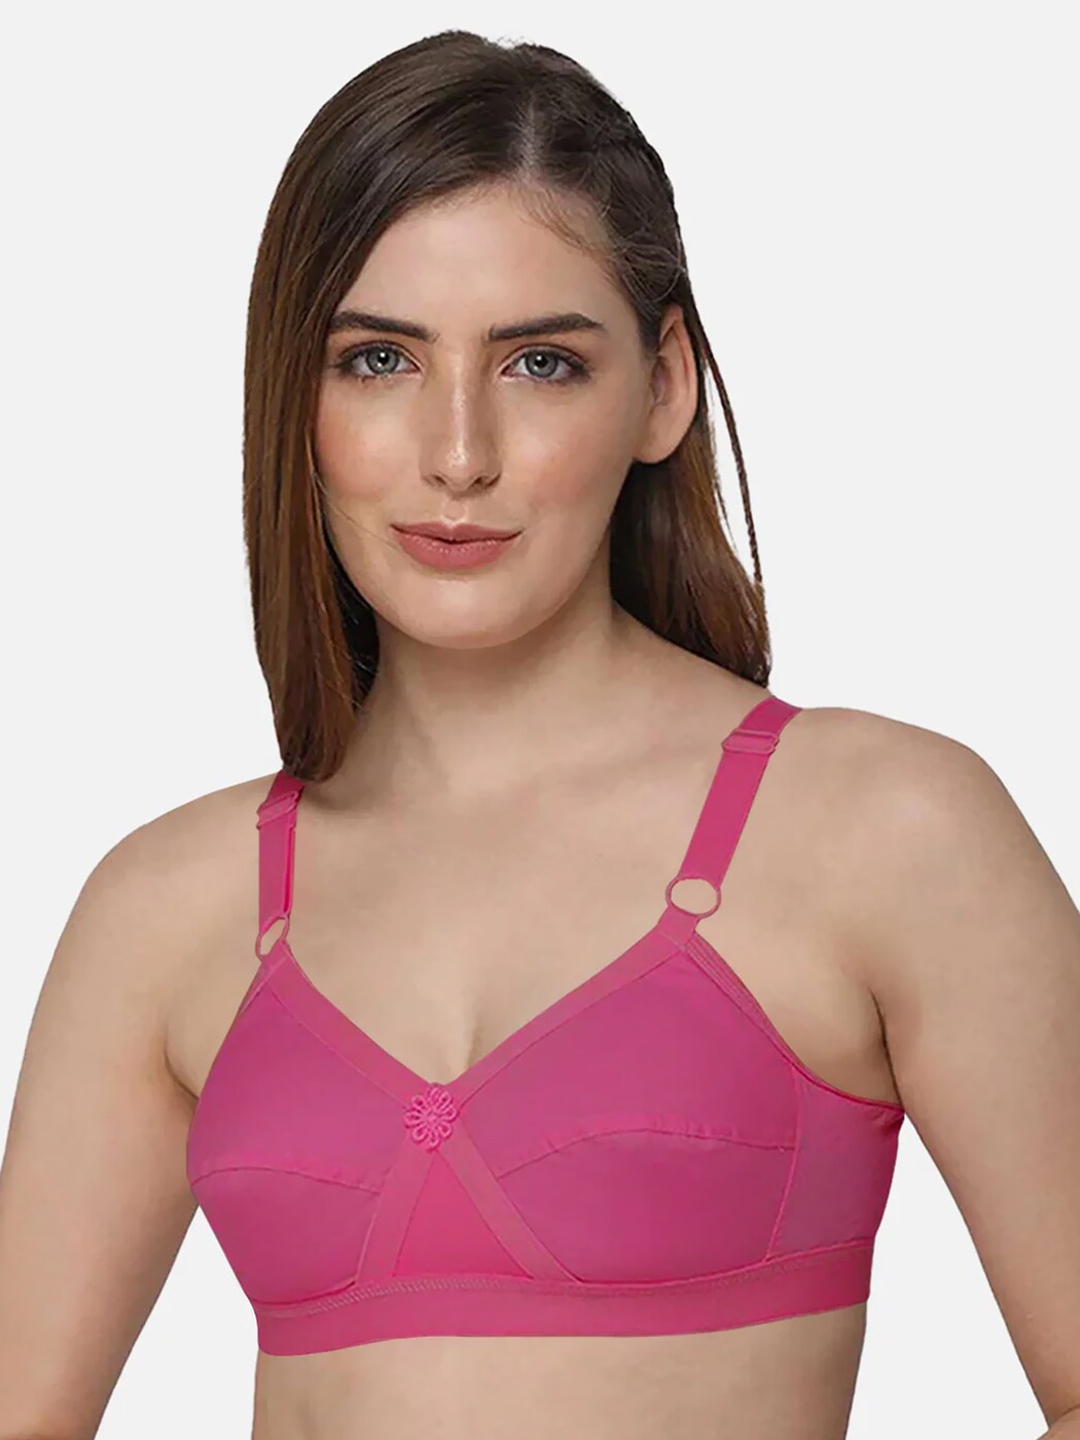 Buy Intimacy Lingerie Full Coverage Cotton Bra With All Day Comfort Bra For Women 26591008 4926